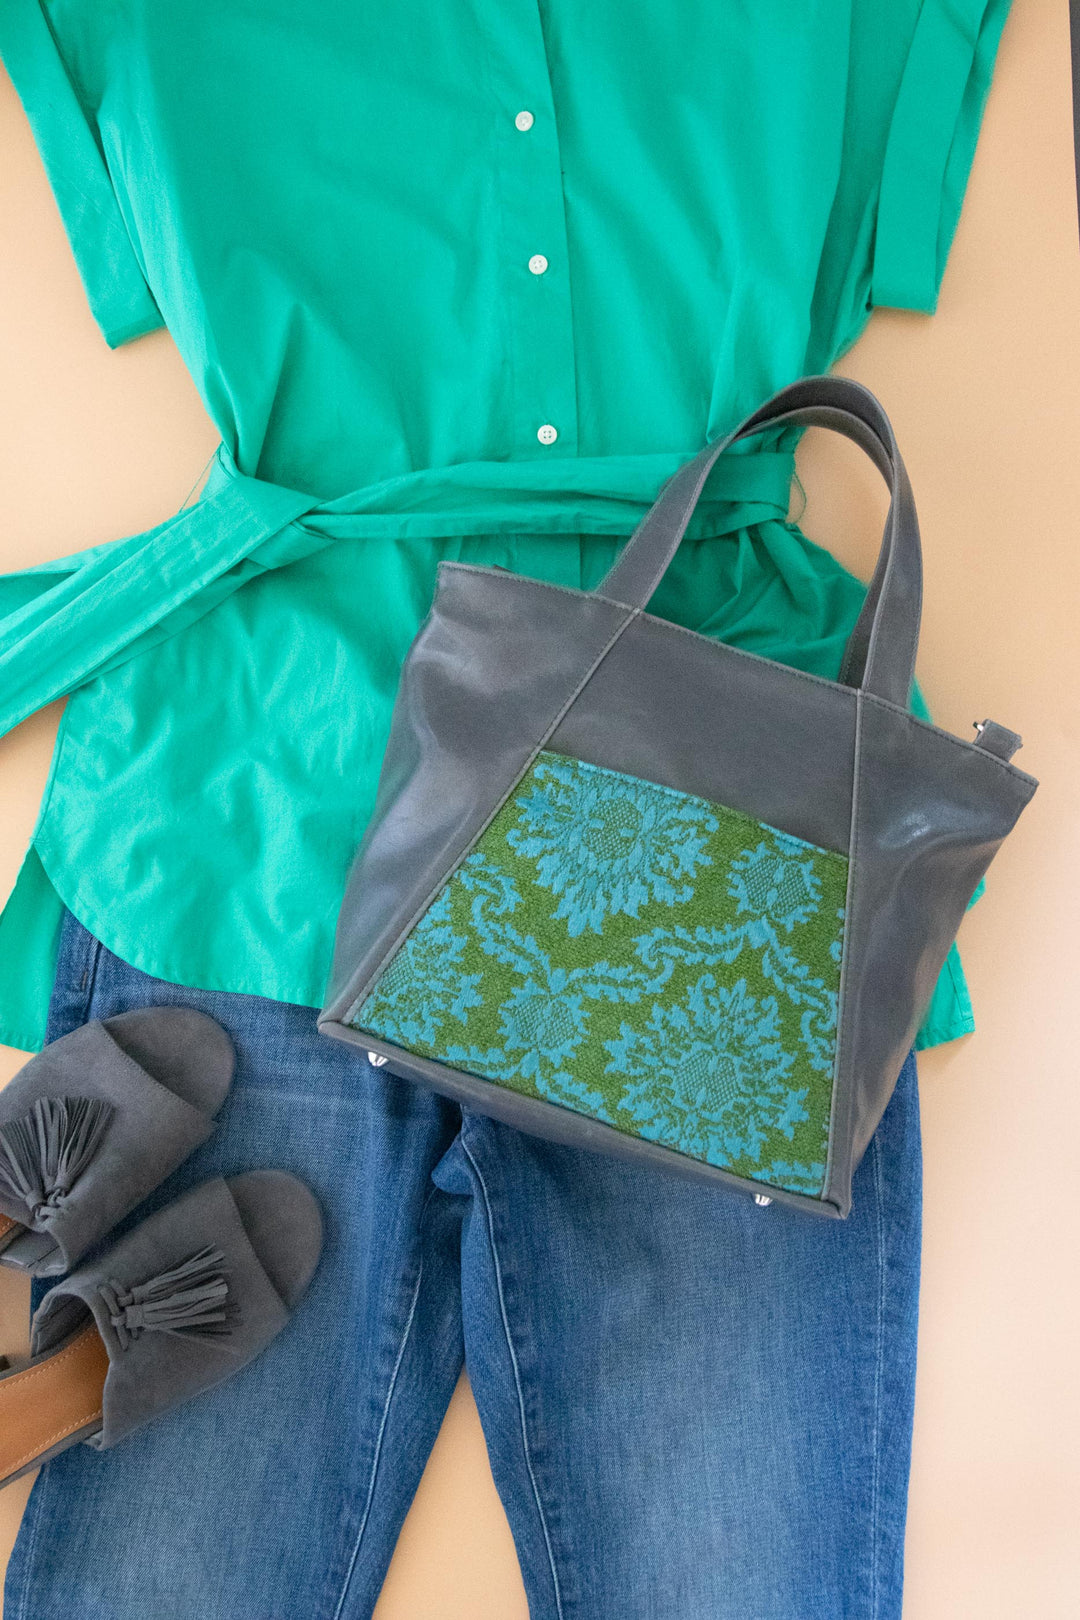 Mini Troubadour Tote - Auntie Mame Teal Brocade with Grey Vegan Leather